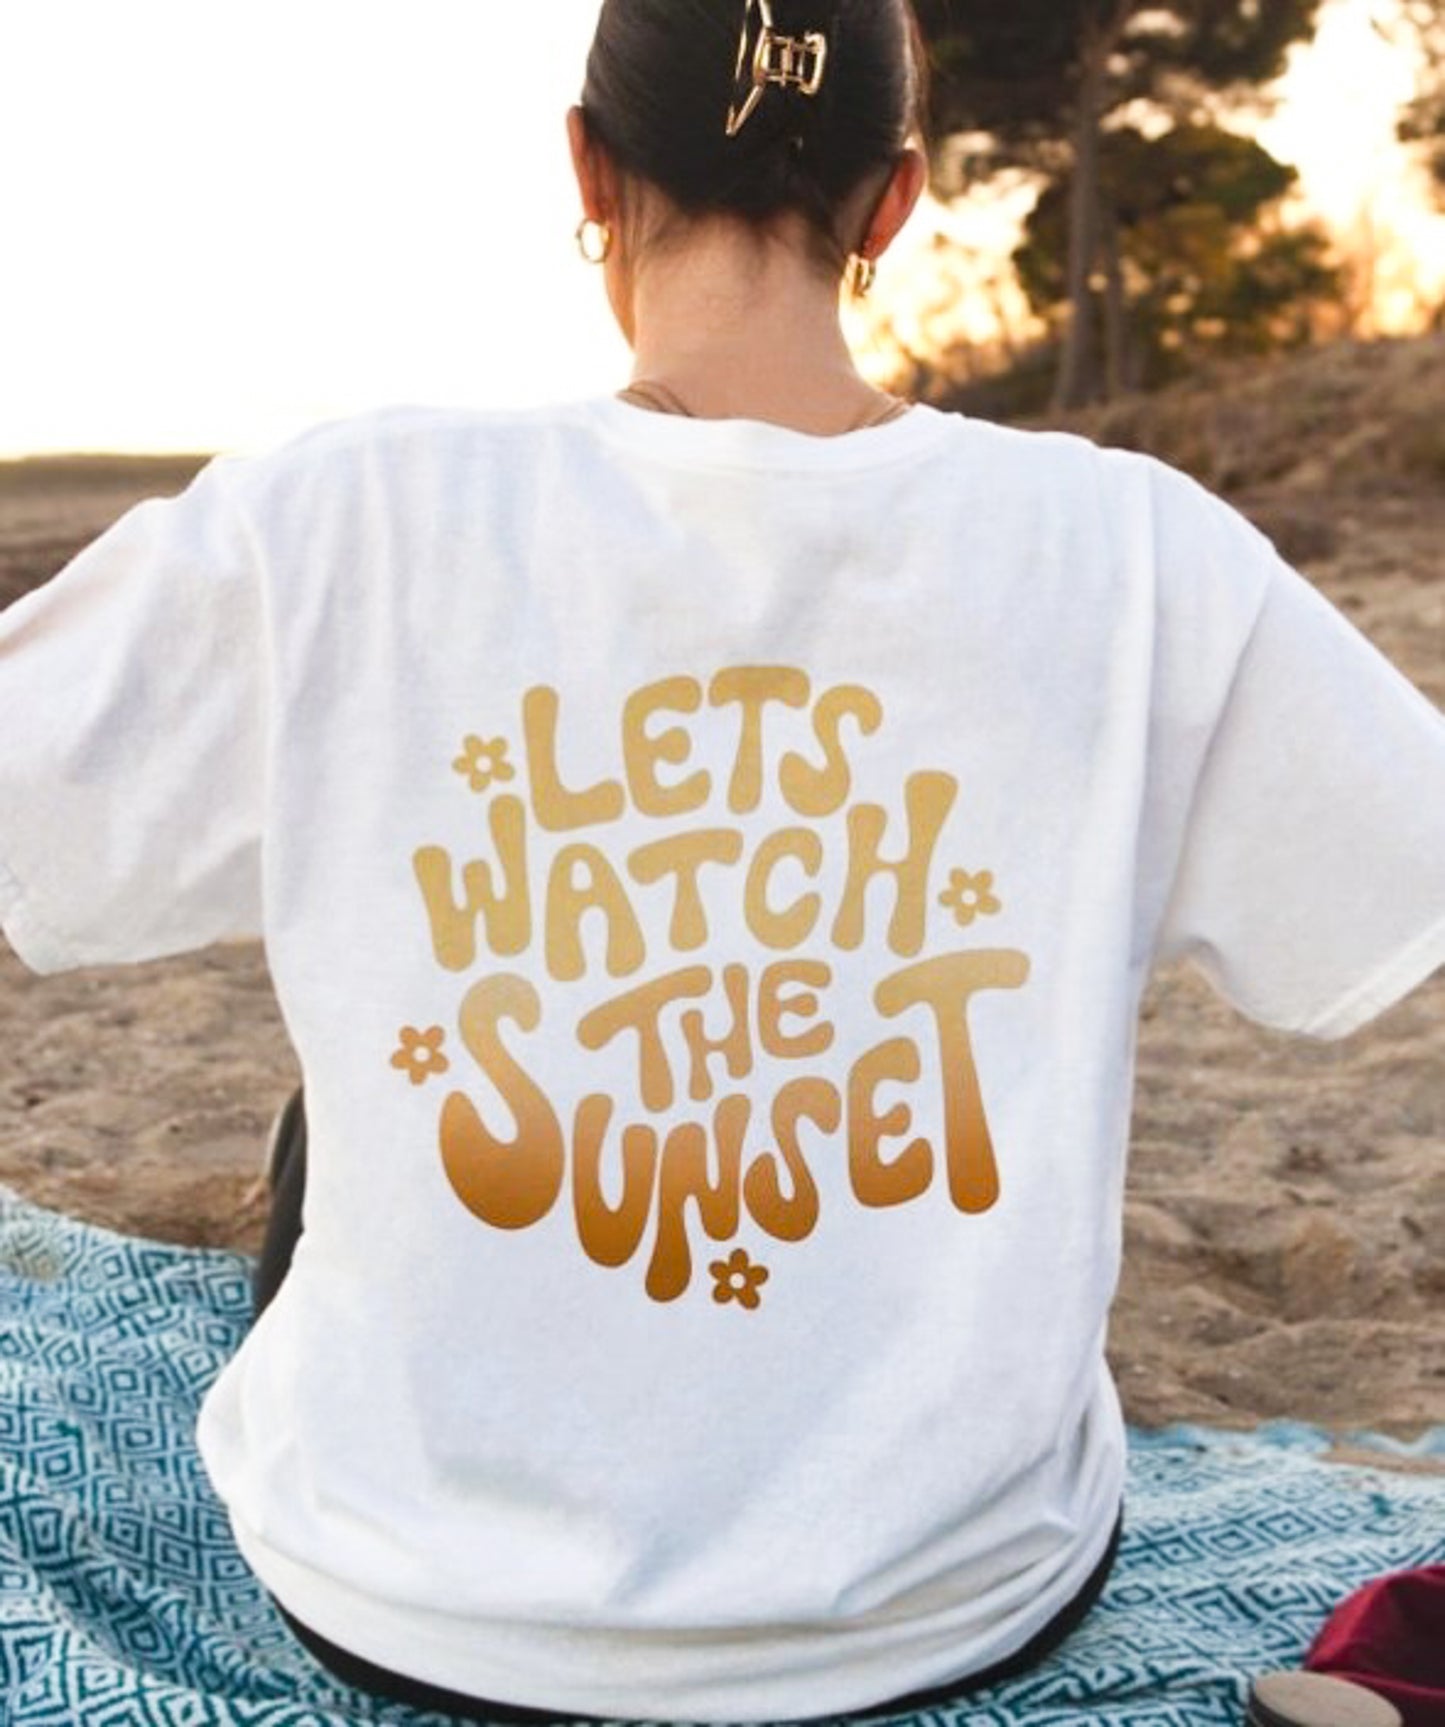 Let's Watch The Sunset (Back Design) T-Shirt or Crew Sweatshirt